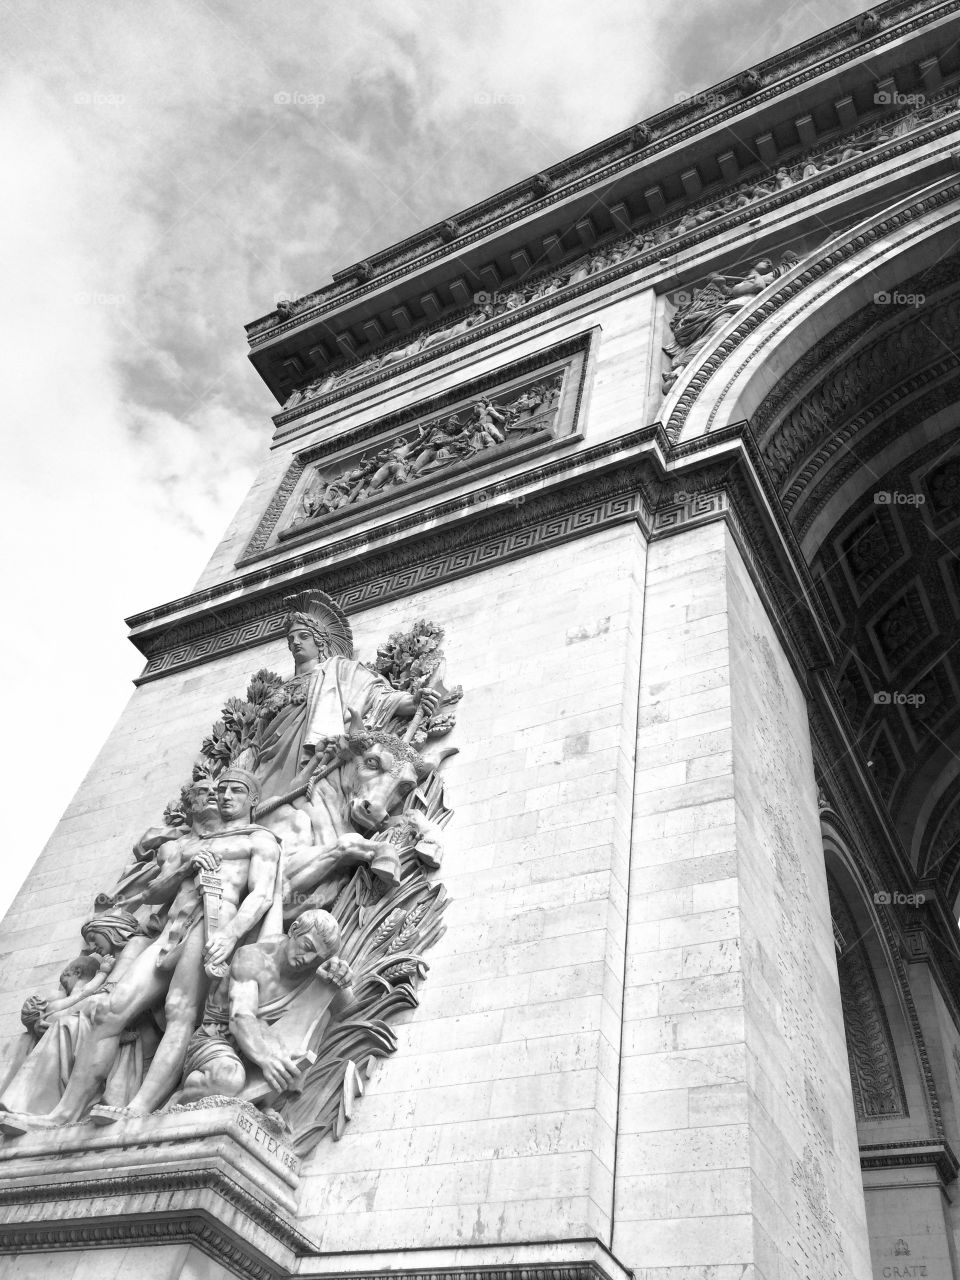 Black and white view of the Arc de Triomphe in Paris